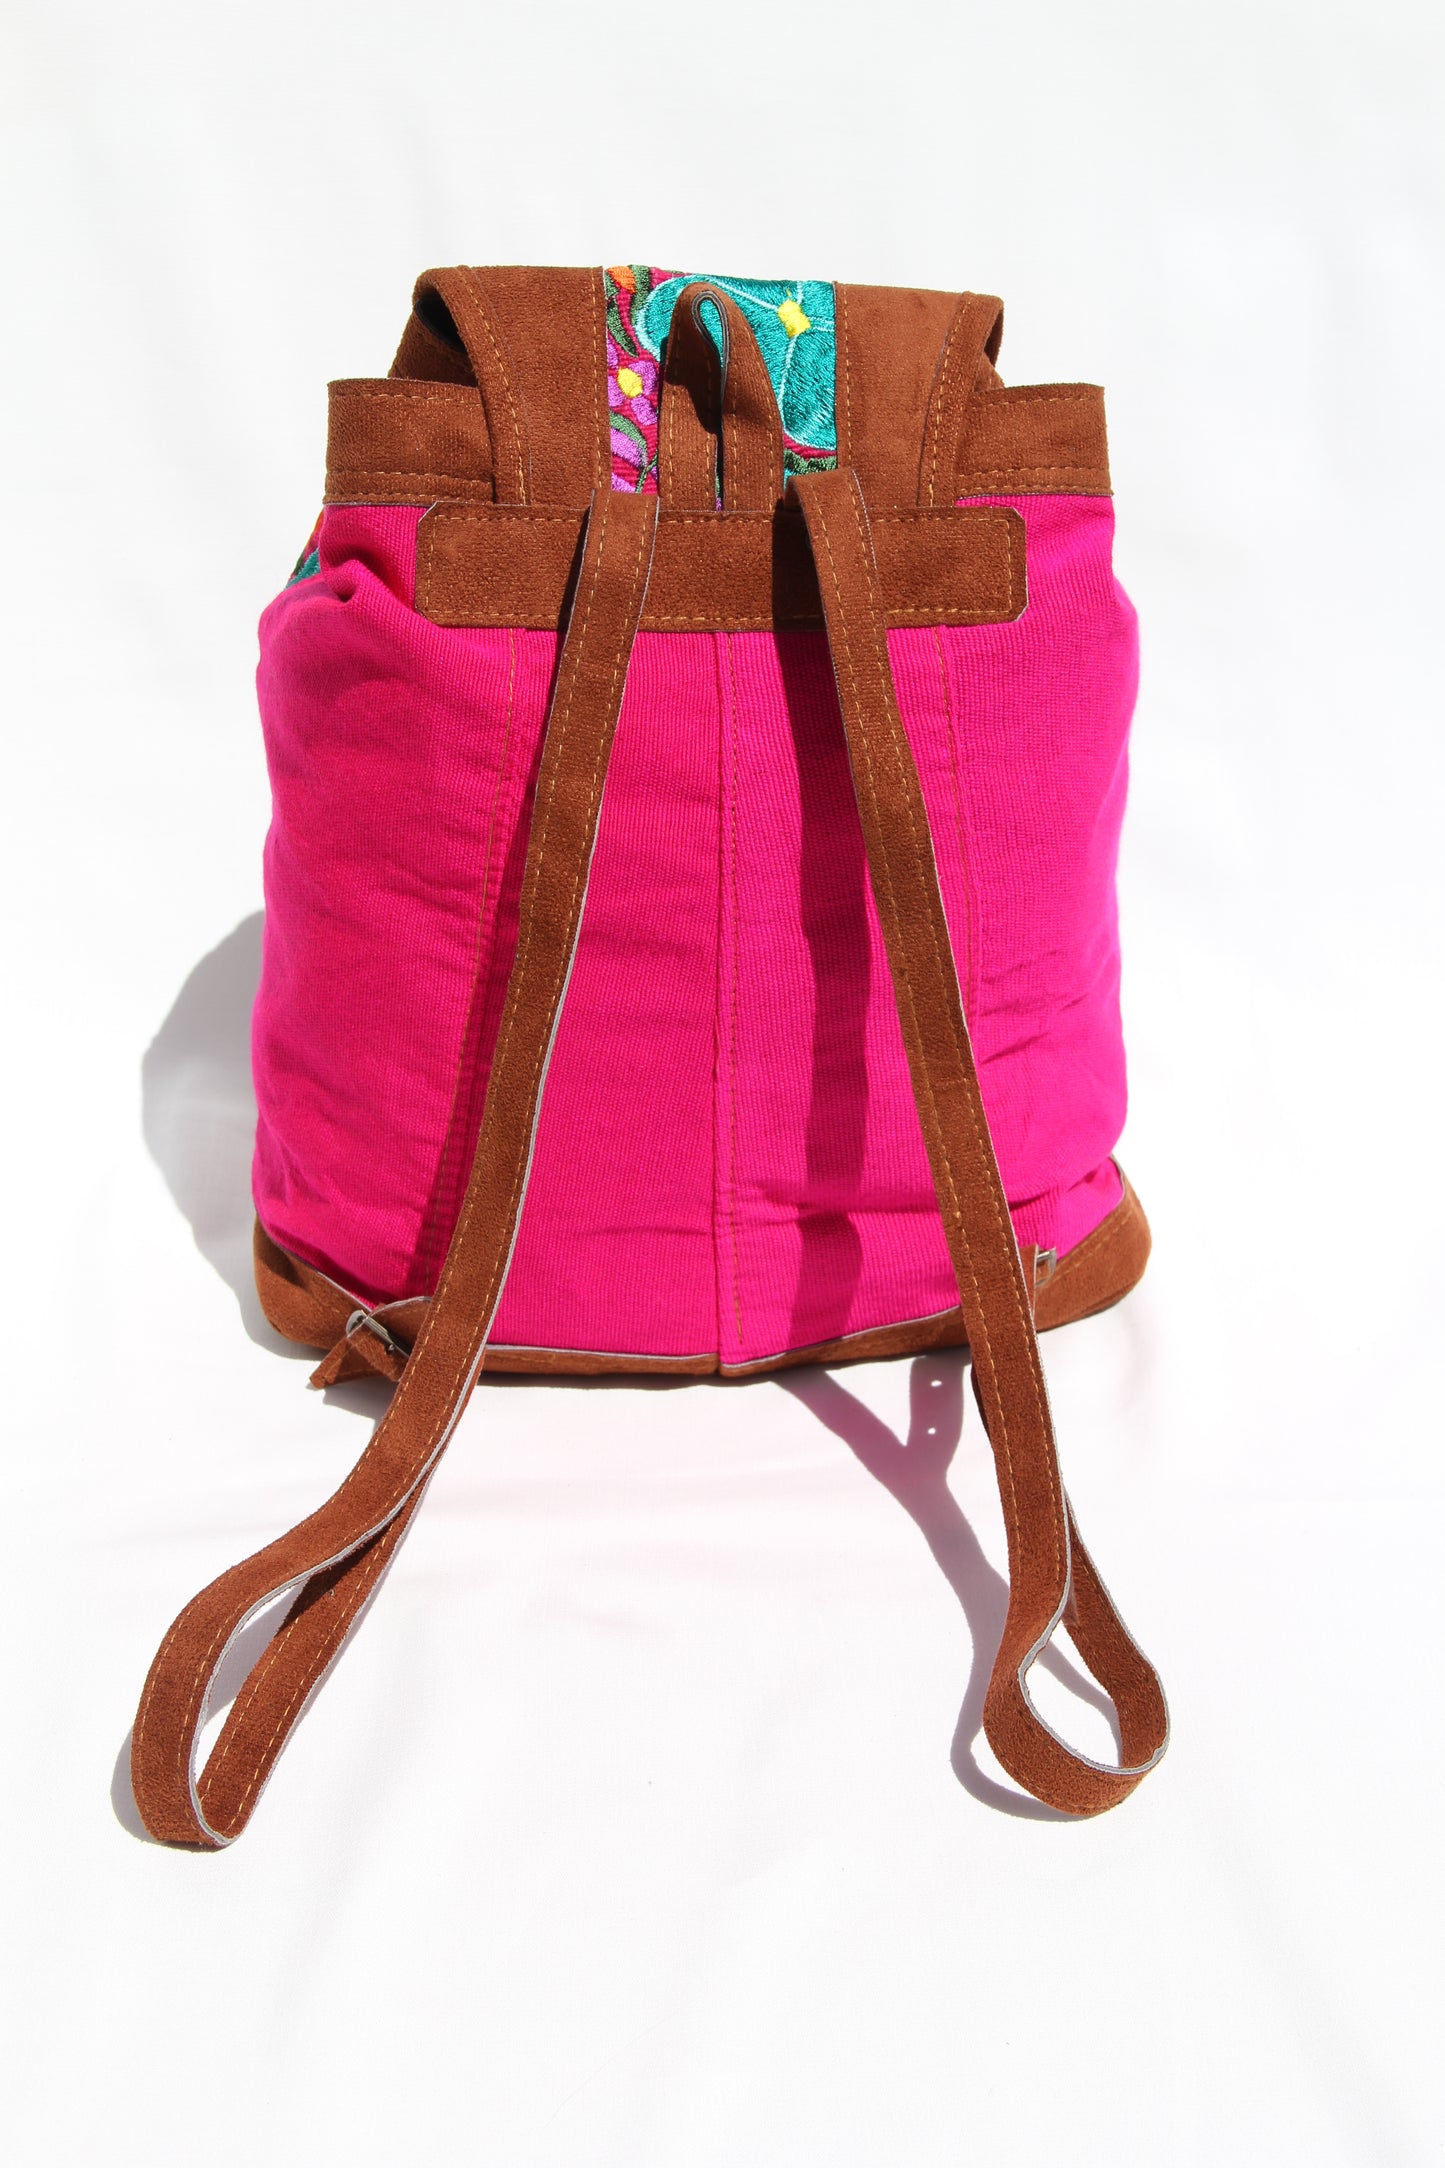 colorful huipil floral embroidery backpack with pink woven fabric and faux suede contrast with adjustable straps and front buckle closure with front zipper pocket the prefect travel, hiking or beach bag unique bag great for back to school take this bag on your next destination boho bag and hippie style bag a great standout accessories made in Guatemala